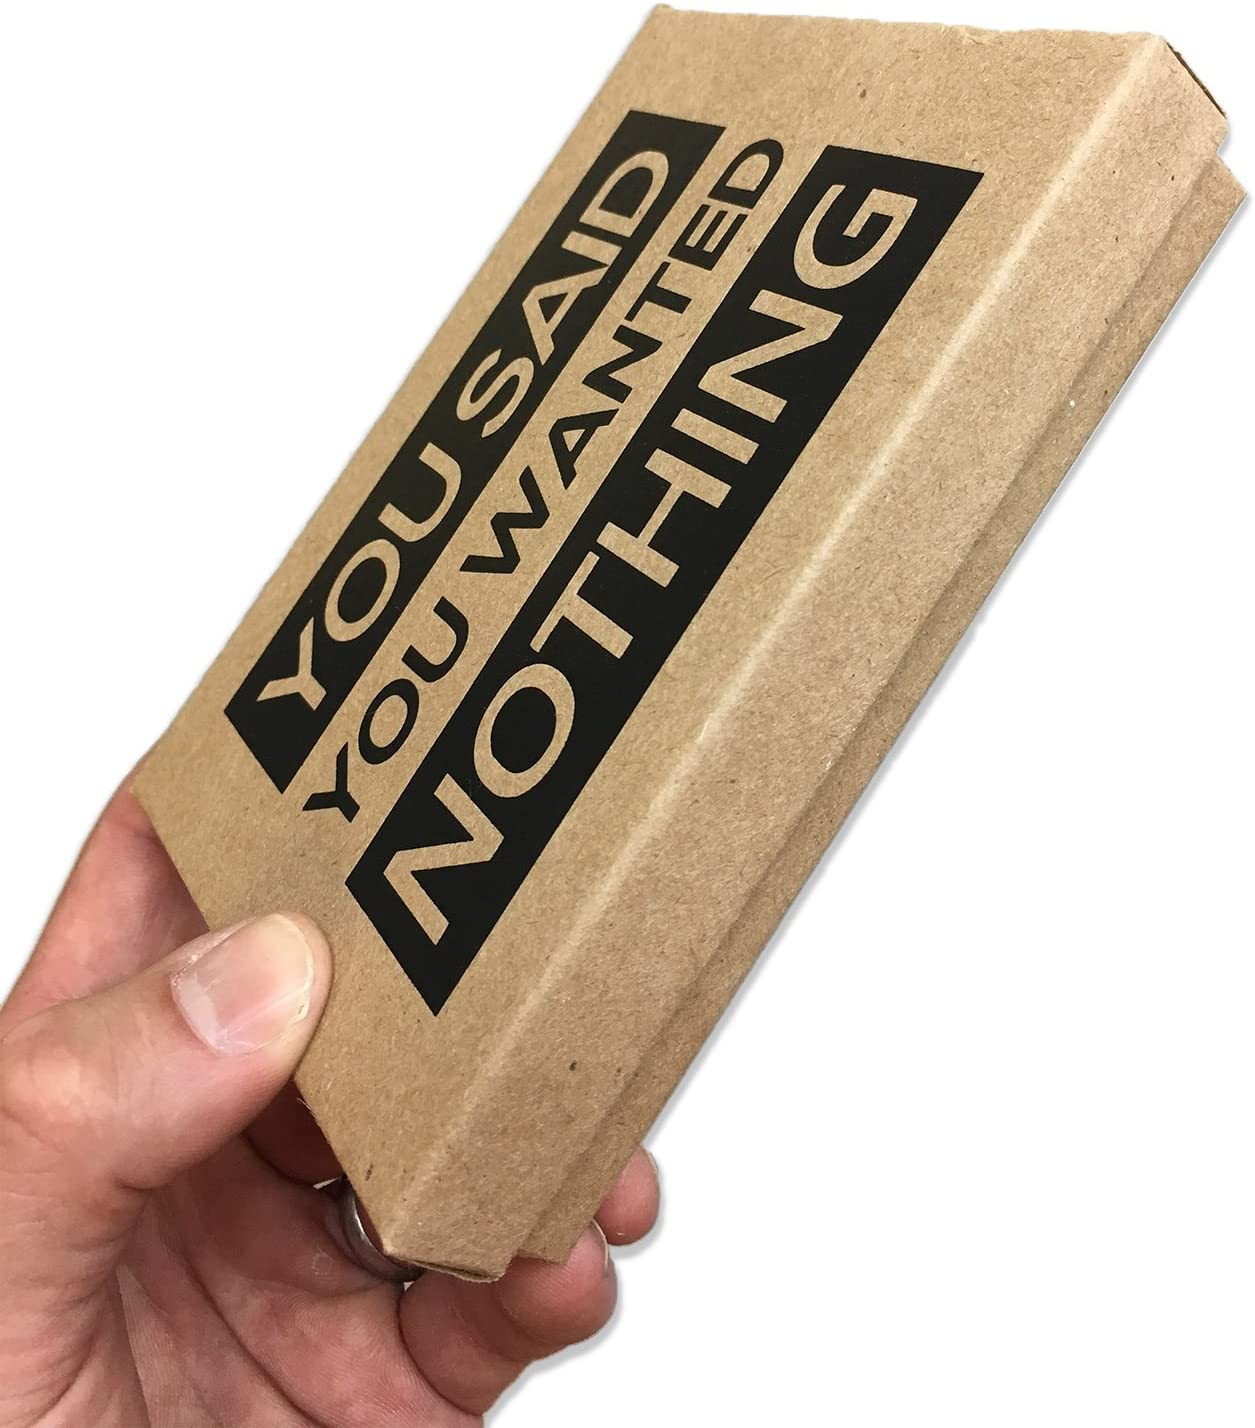 A hand is holding a box which is a gag gift idea for the person who always says they want nothing for an occasion. The lid of the box says, 'You said you wanted nothing.'